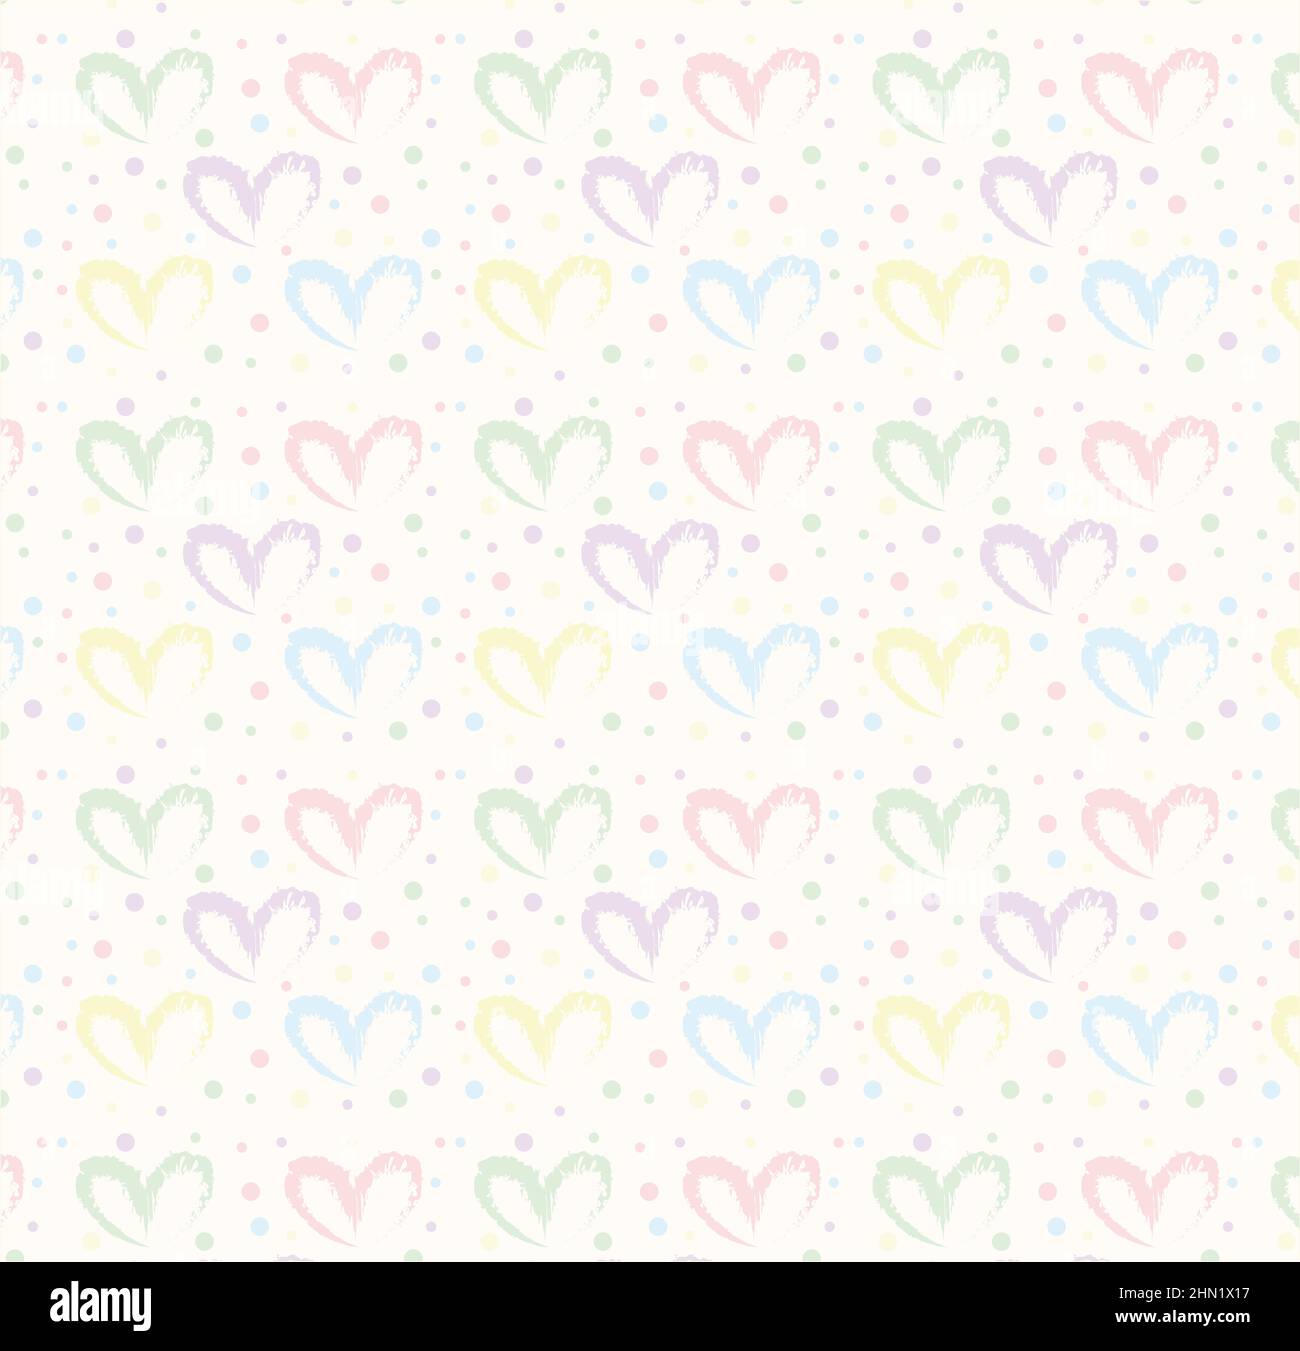 Seamless pattern of hand drawn simple hearts in pastel rainbow colors on beige and neutral background with colored dots Stock Photo